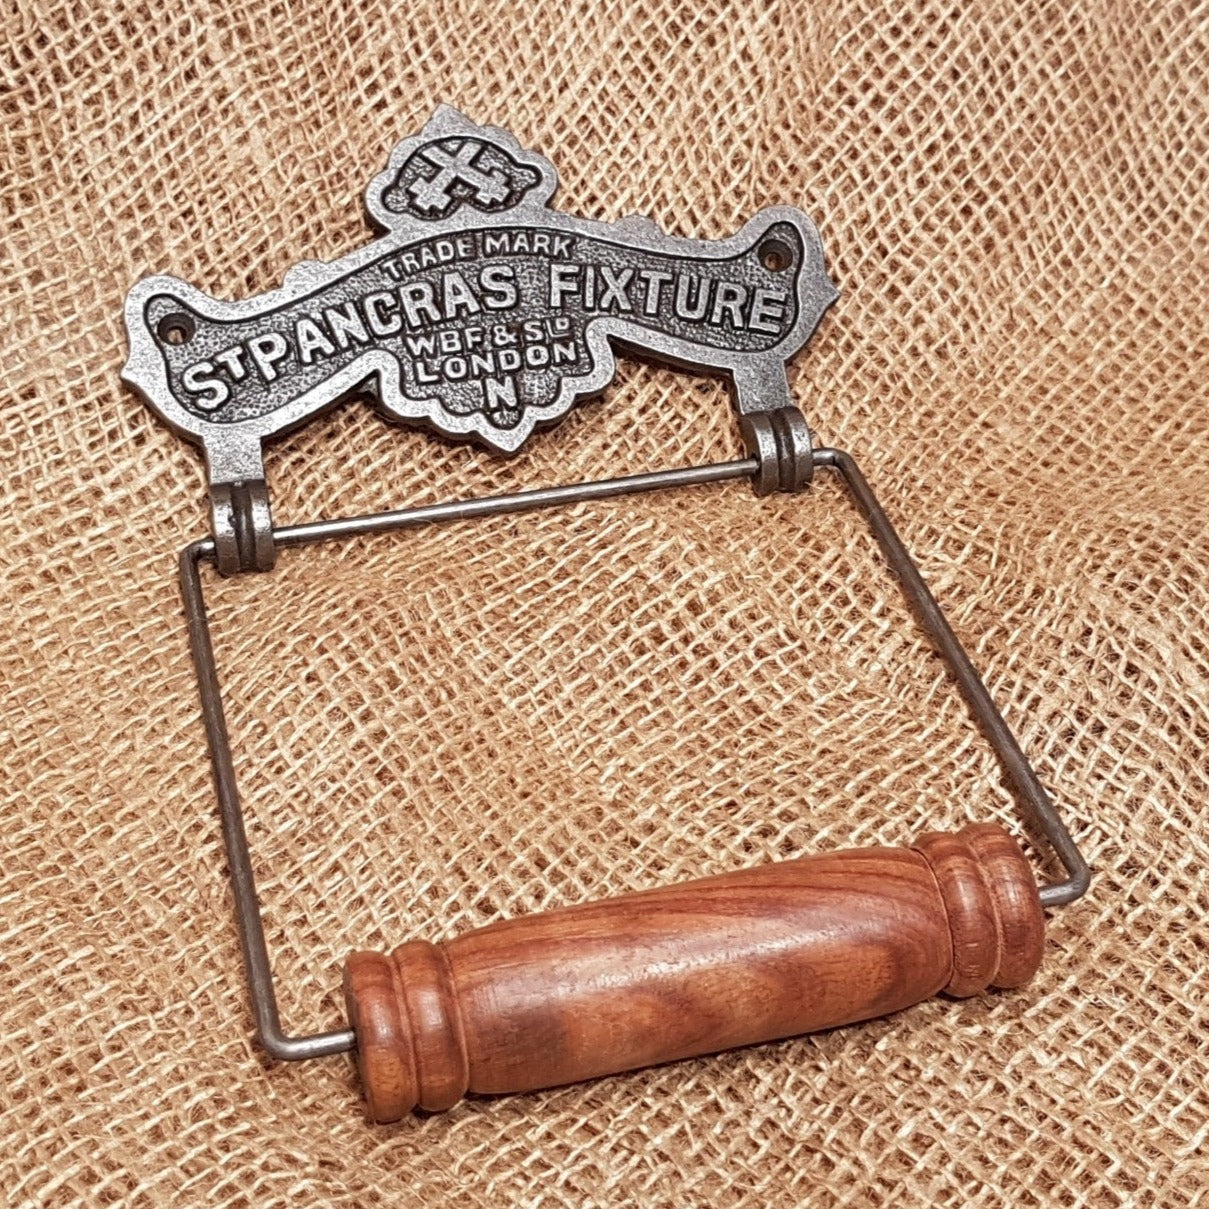 St Pancras - Vintage Toilet Paper Holder - Spearhead Collection - Toilet Paper Holders - Bathroom Decor, Home Decor, Made in England, Toilet Paper Holders